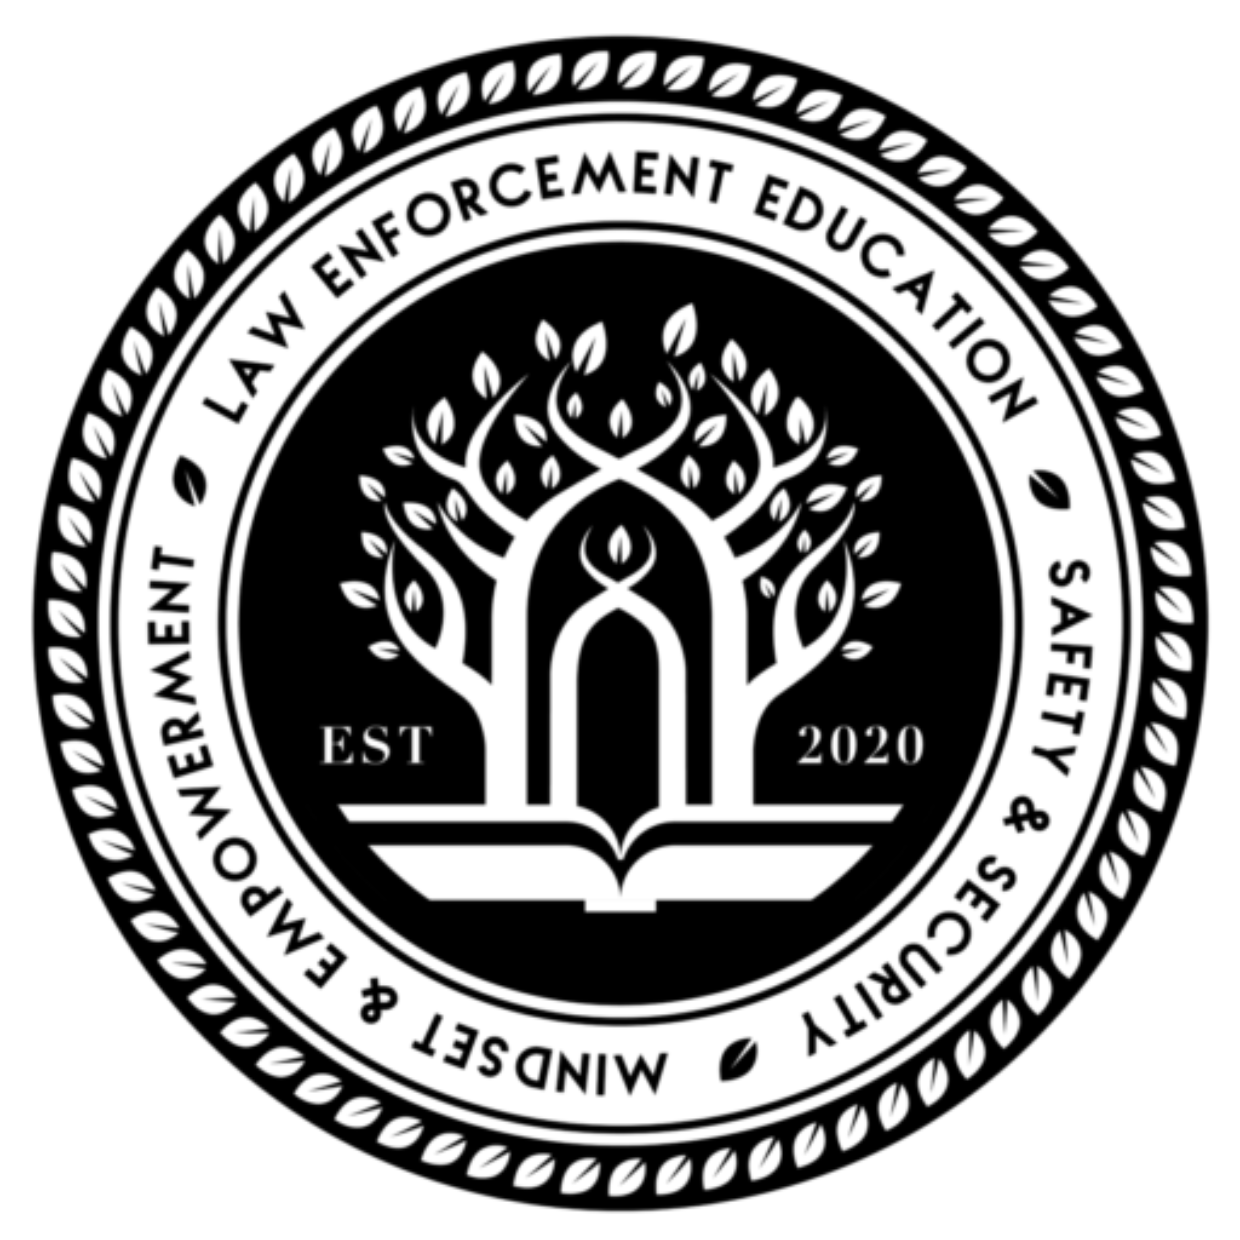 A black and white image of the law enforcement education, safety & criminal justice program logo.